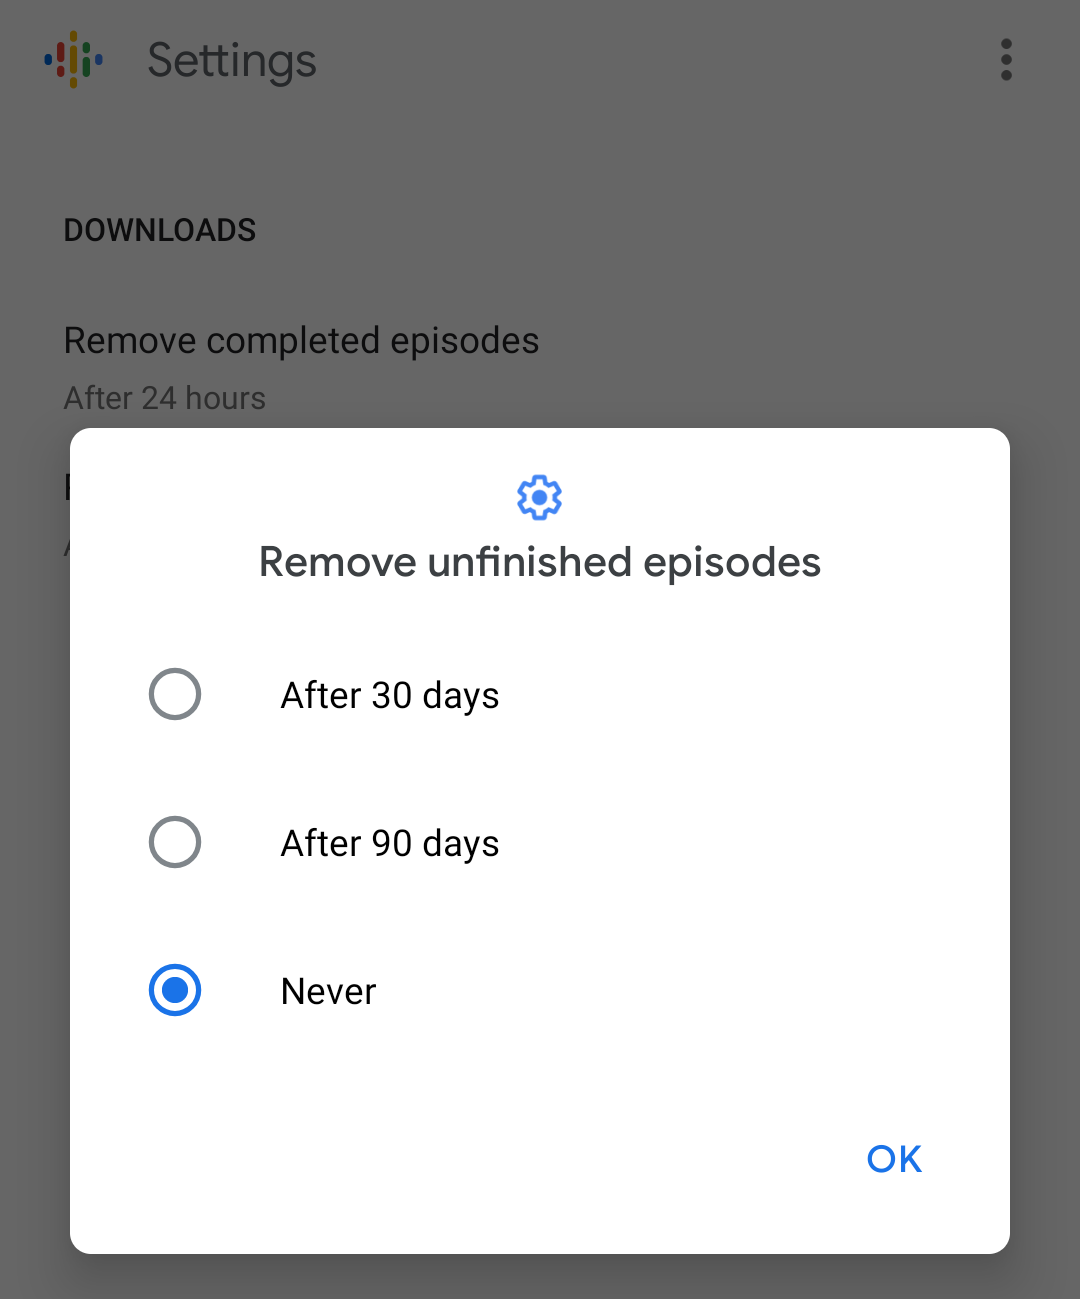 How To Get Started In Google’s New Podcasts App